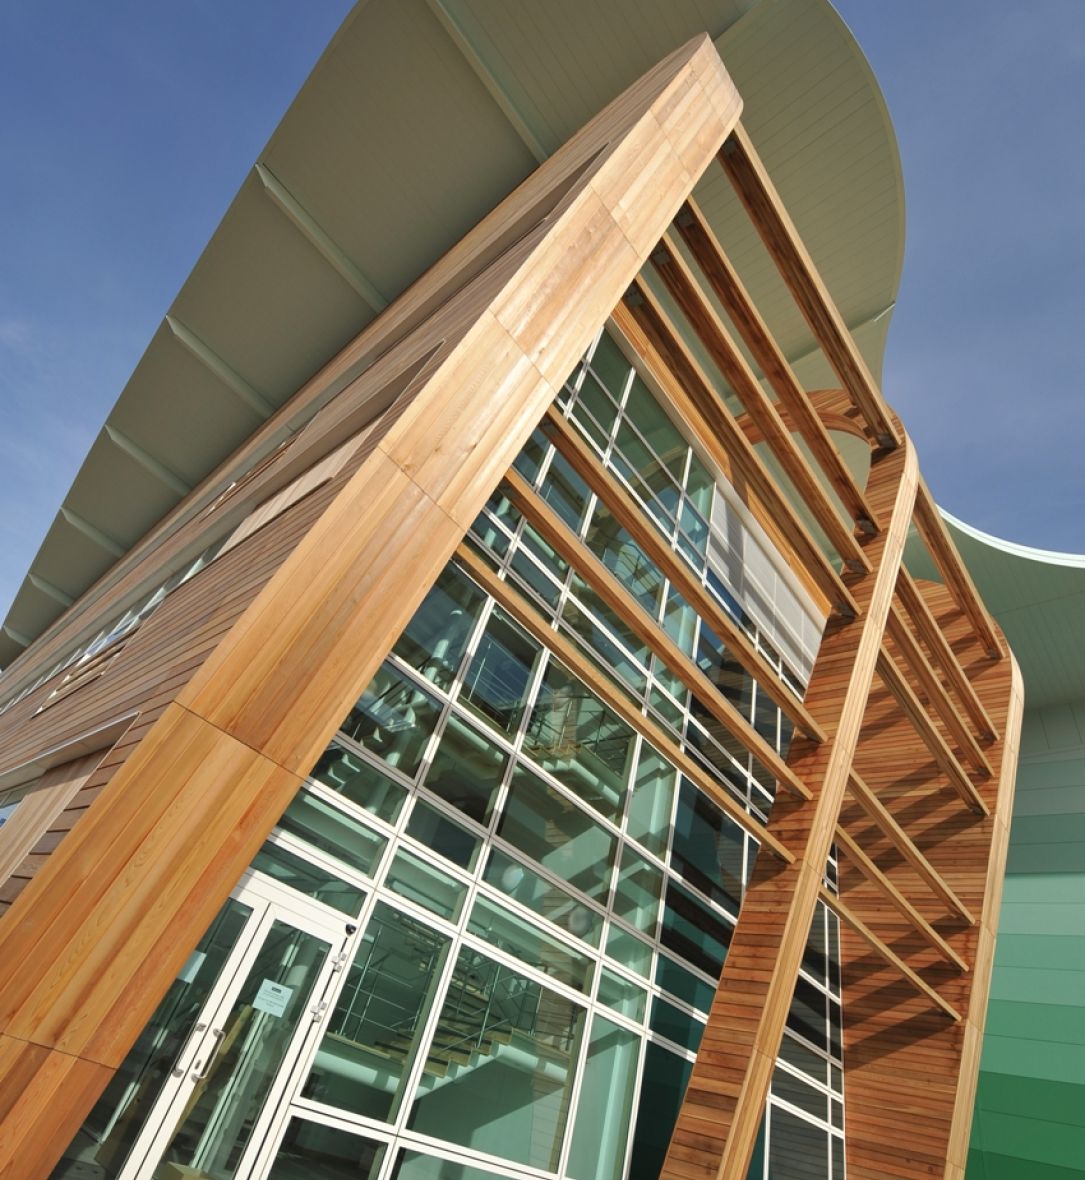 Wood cladding panels installed at G Park, Blue Planet 